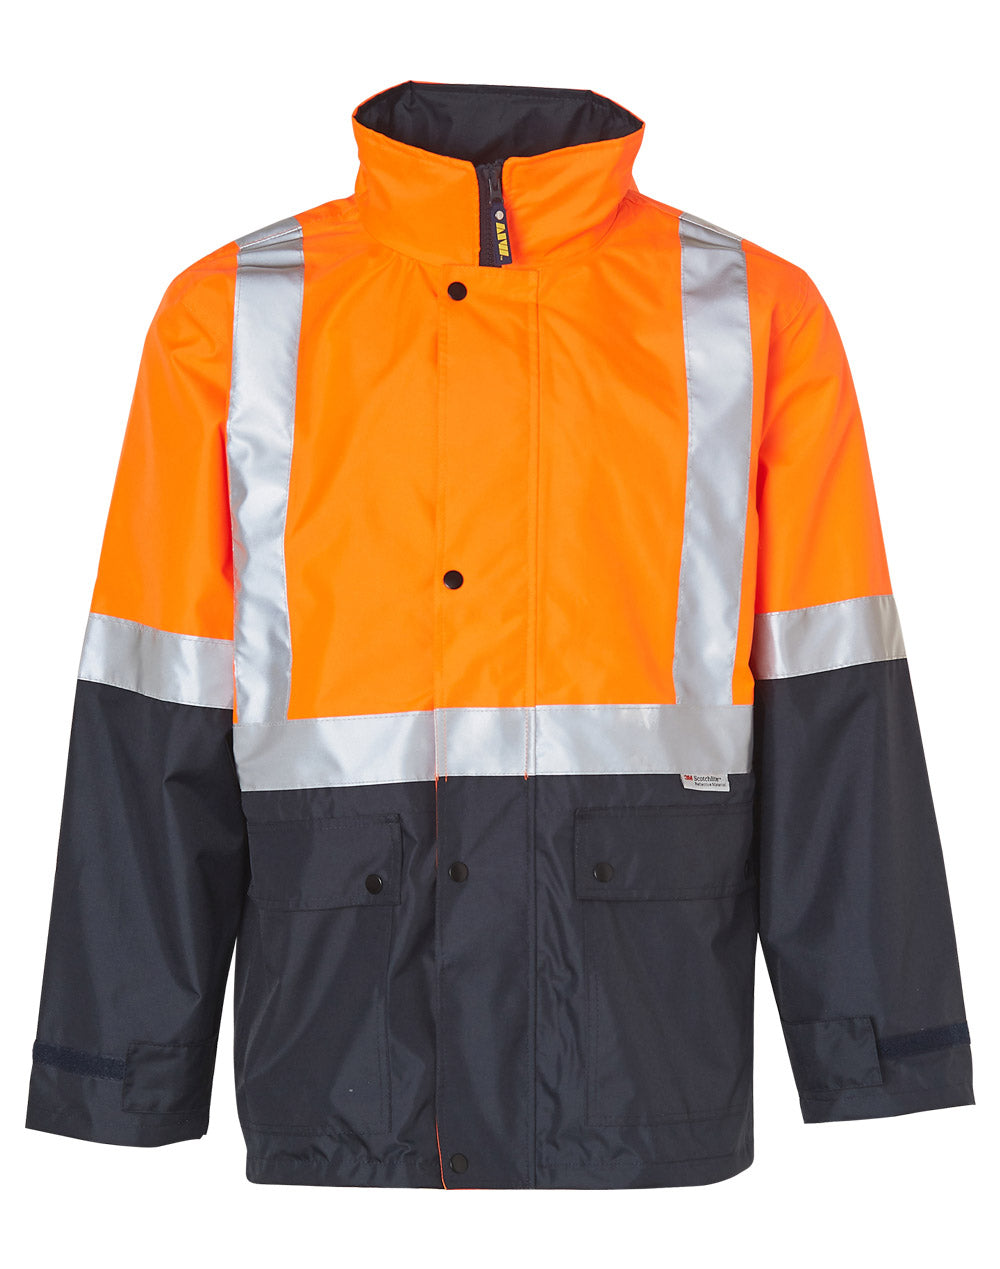 [SW18A] Hi-Vis Two Tone Rain Proof Safety Jacket With 3M Tapes